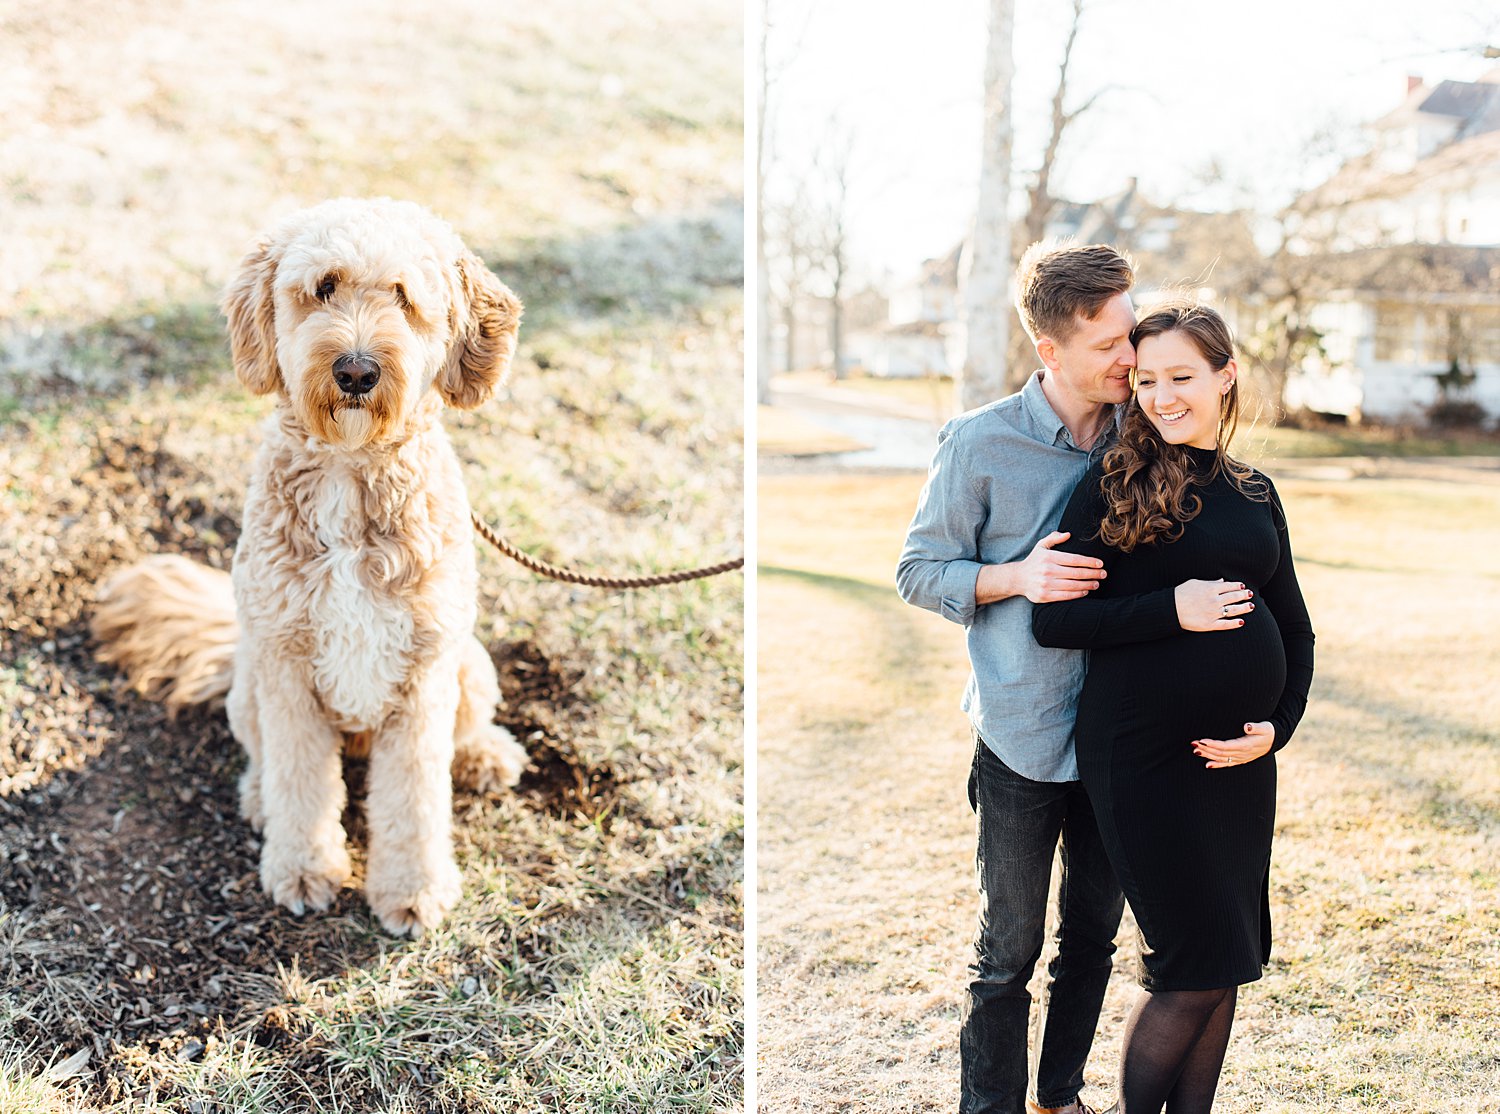 Manns Family - Navy Yard Maternity Session - Silver Spring Maryland Family Photographer - Alison Dunn Photography photo